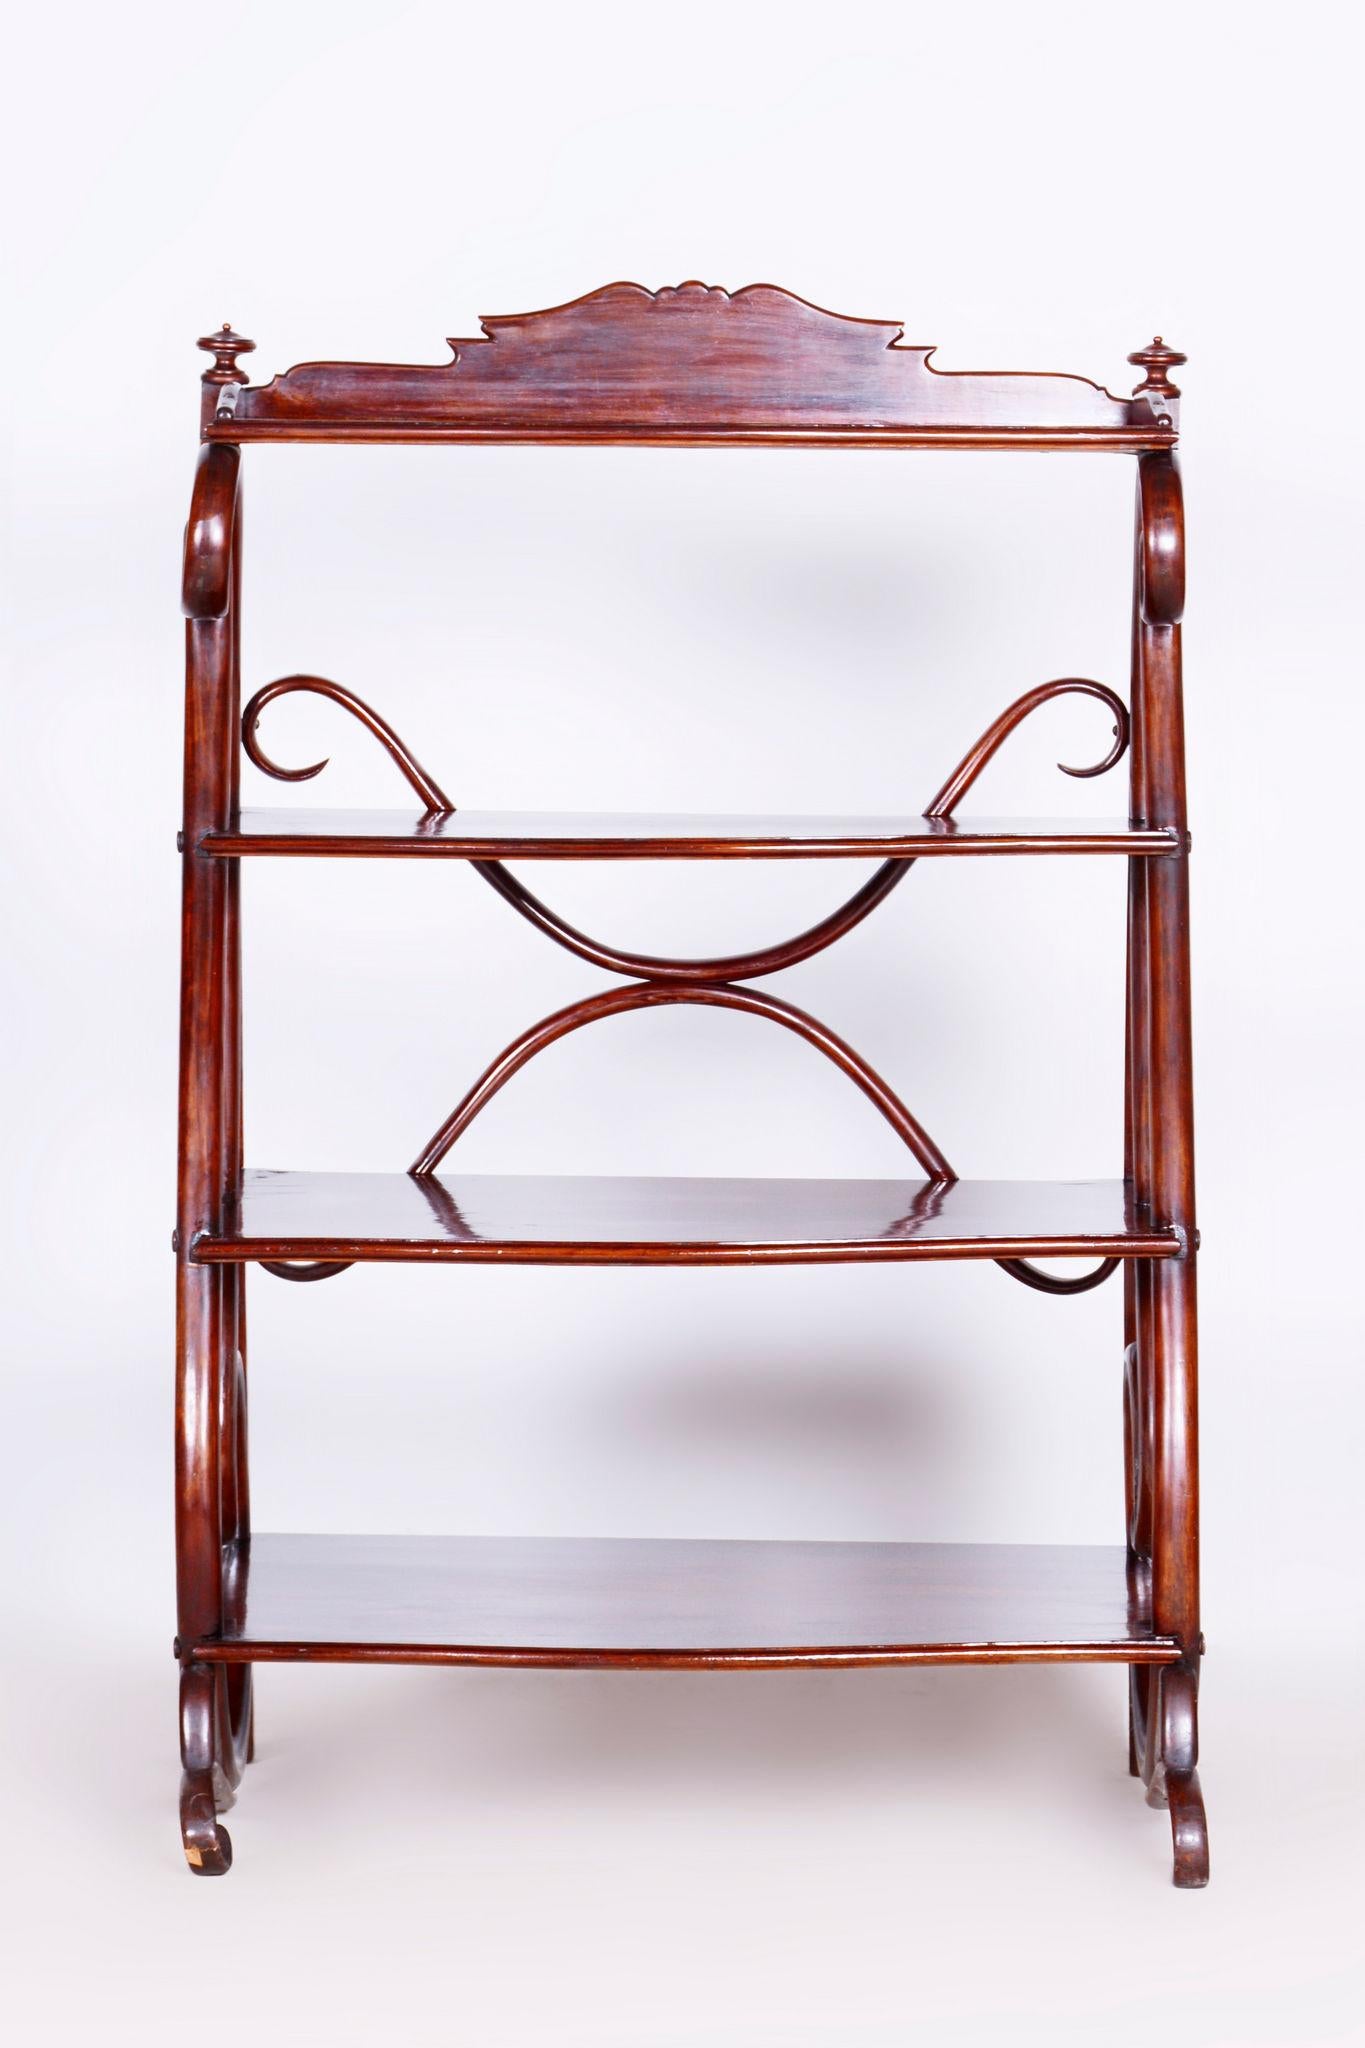 Made by influential Austrian furniture manufacturer Thonet.

It has been re-polished with polyutherane piano lacquer by our professional refurbishing team in Czechia according to the original process.

This item features classic Biedermeier